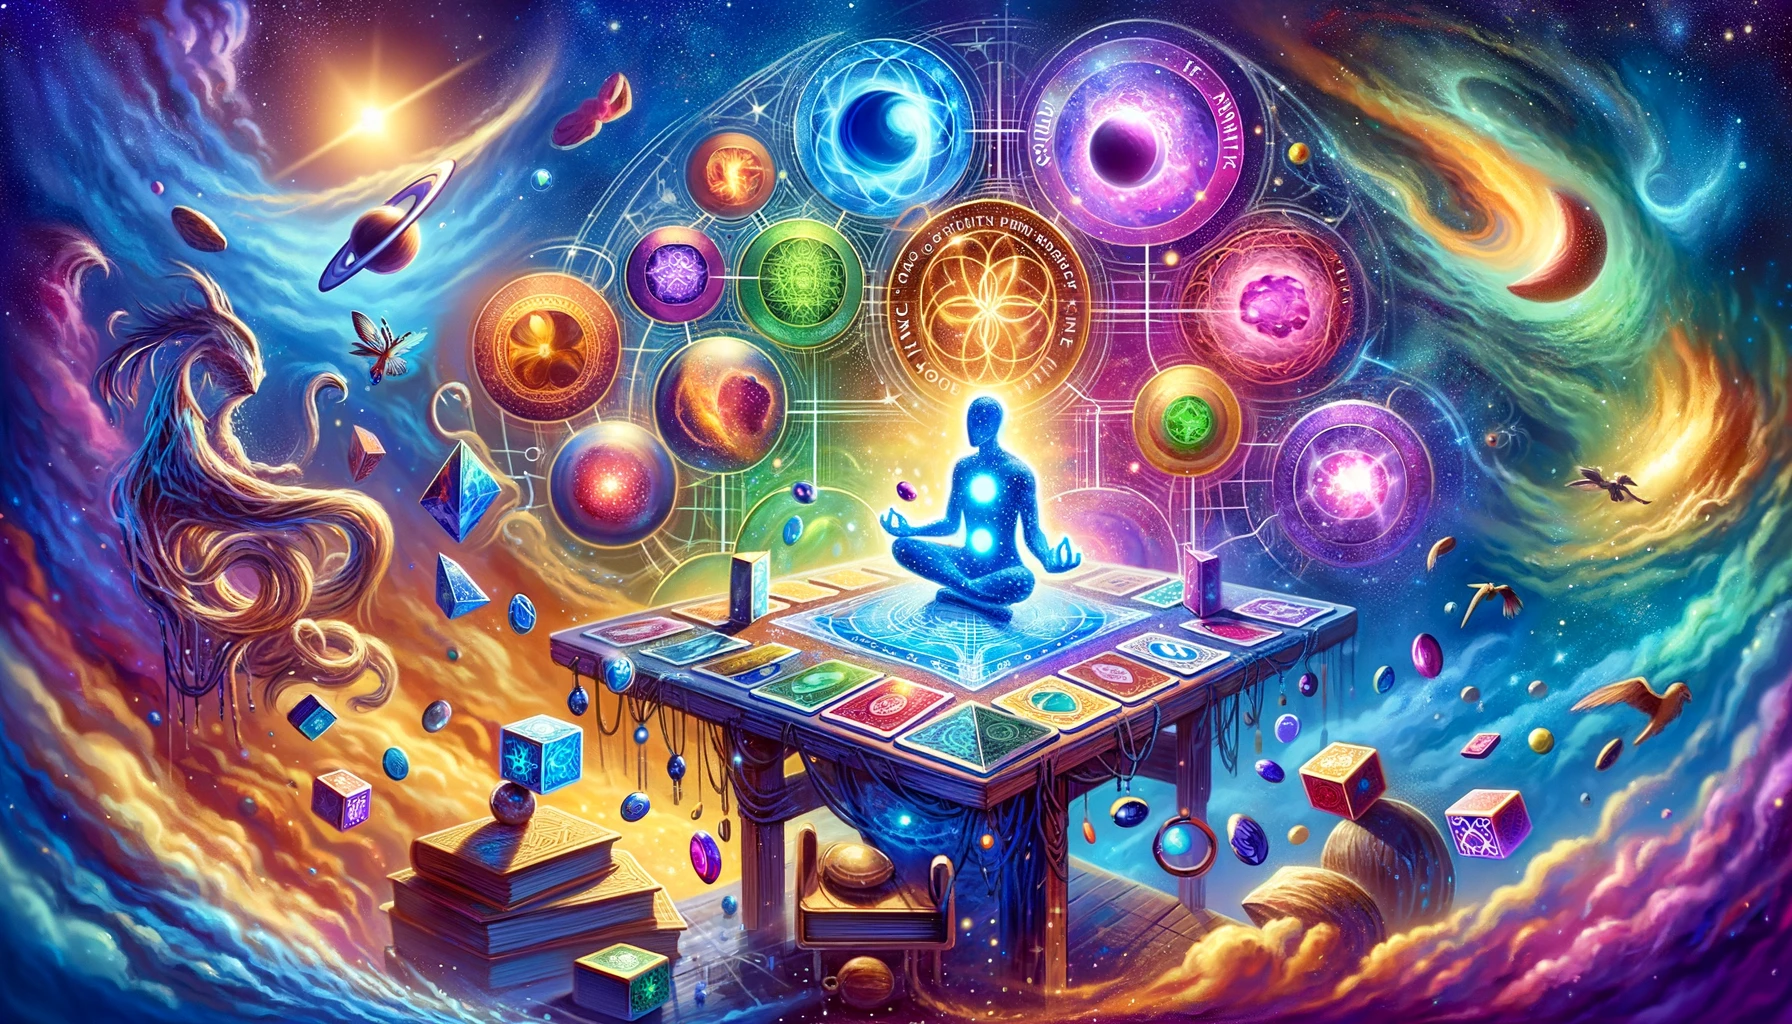 Space scene with a meditating figure and mystical symbols, inspired by the Marvel Snap Infinity Stones